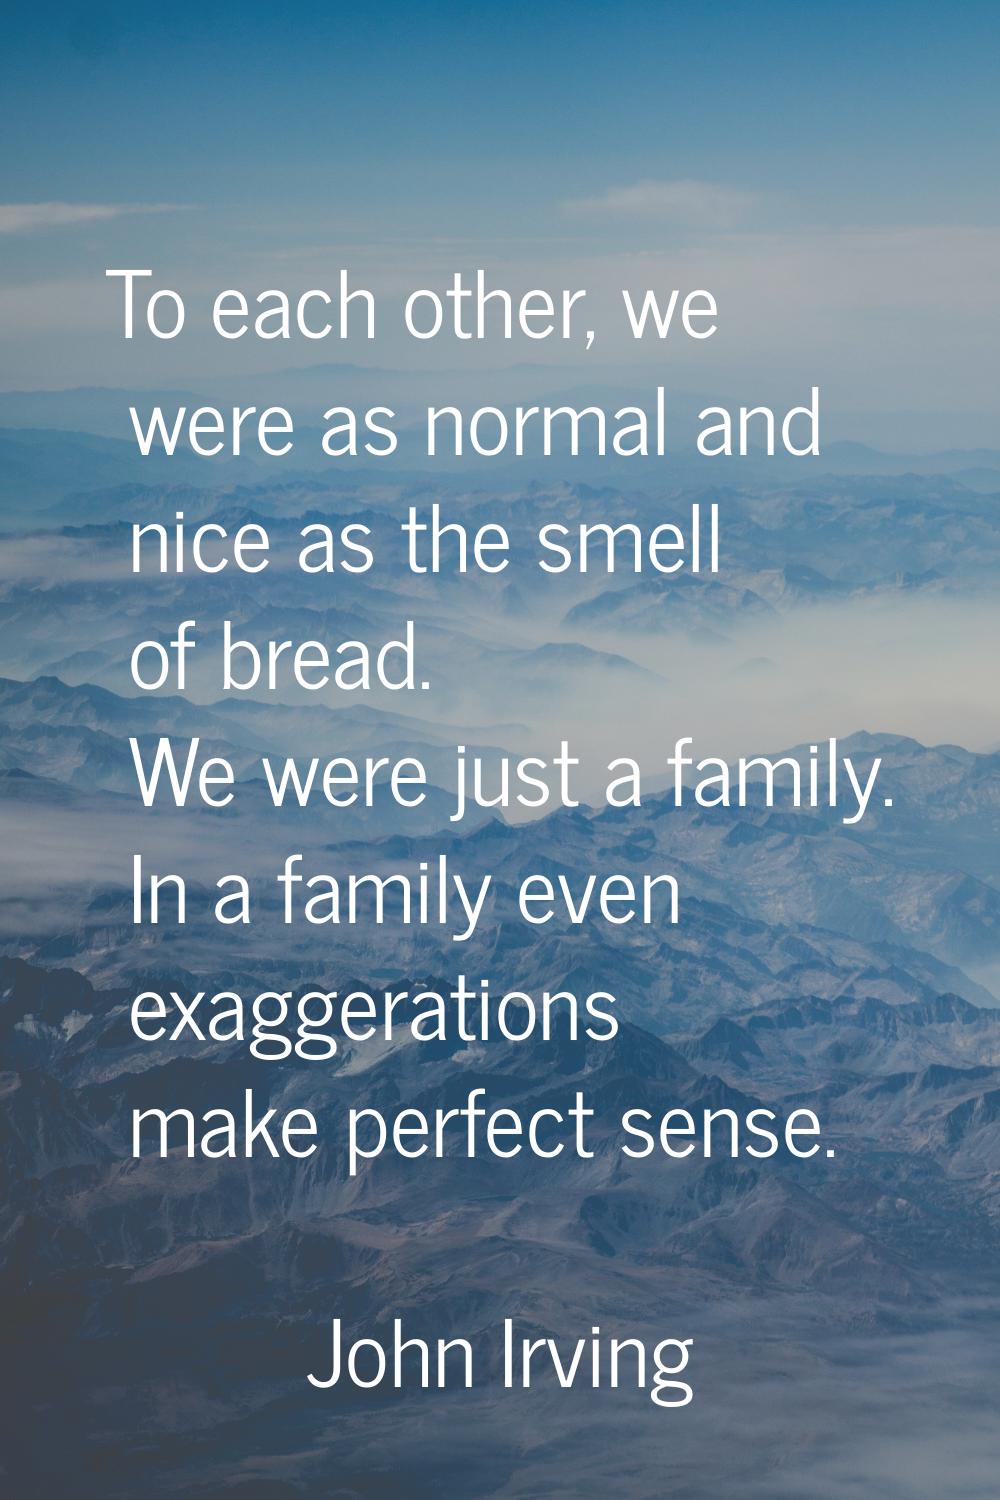 To each other, we were as normal and nice as the smell of bread. We were just a family. In a family